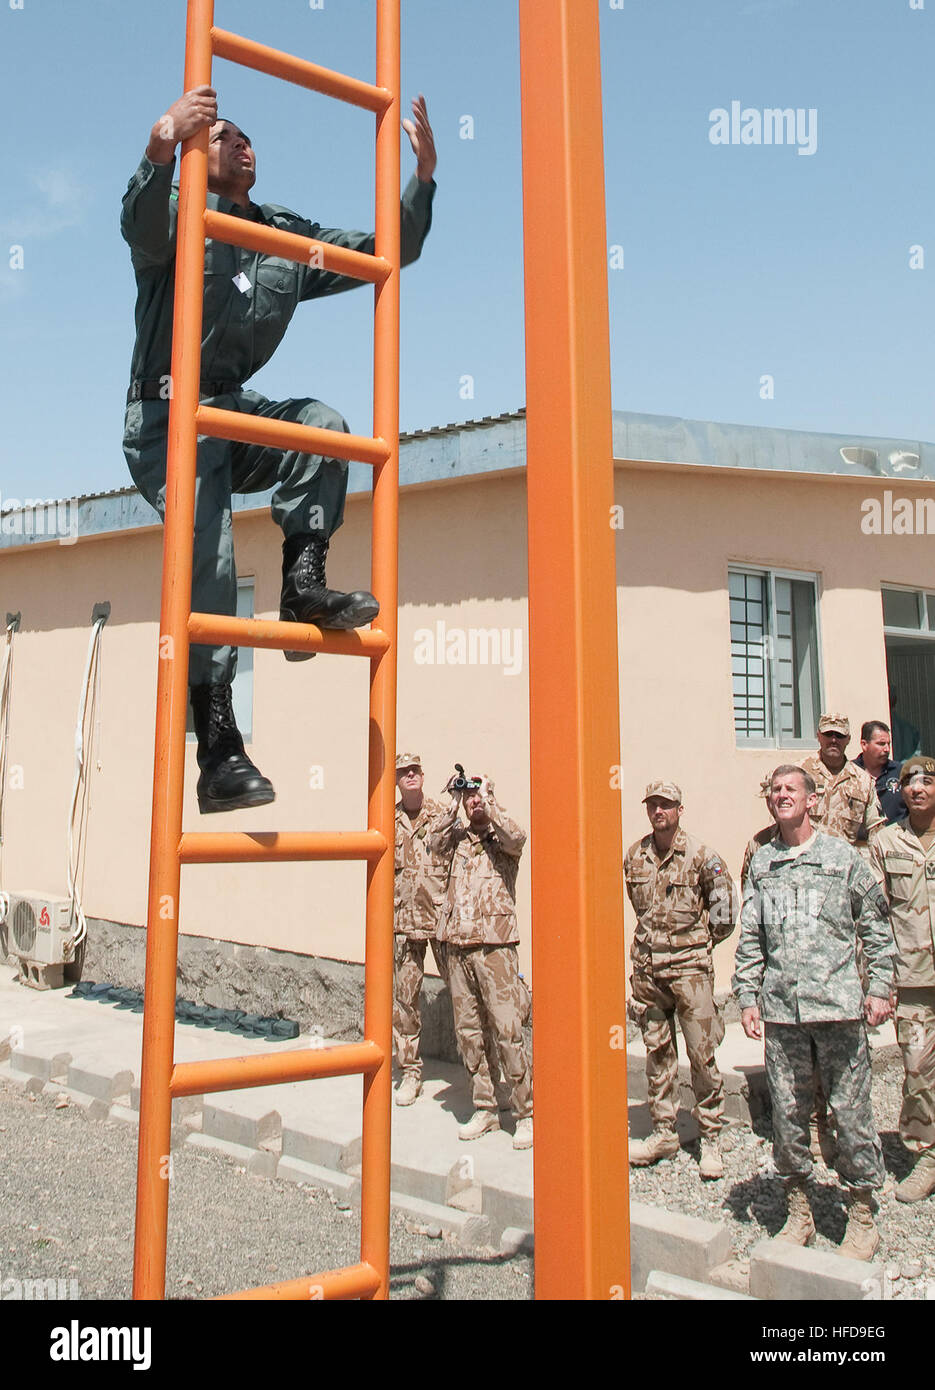 LOGAR PROVINCE, Afghanistan (April 9, 2010) — U.S. Army Gen. Stanley A. McChrystal, commander of NATO’s International Security Assistance Force and U.S. Forces-Afghanistan observes a cadet at the Afghan National Police Academy training facility climb an obstacle course ladder at Forward Operating Base Shank.  Czech and Afghan instructors teach a course that includes first-aid treatment, patrolling, weapons training and other police related topics.  (U.S. Navy photo by Petty Officer 1st Class Mark O’Donald/Released) Afghan Police Academy 271712 Stock Photo